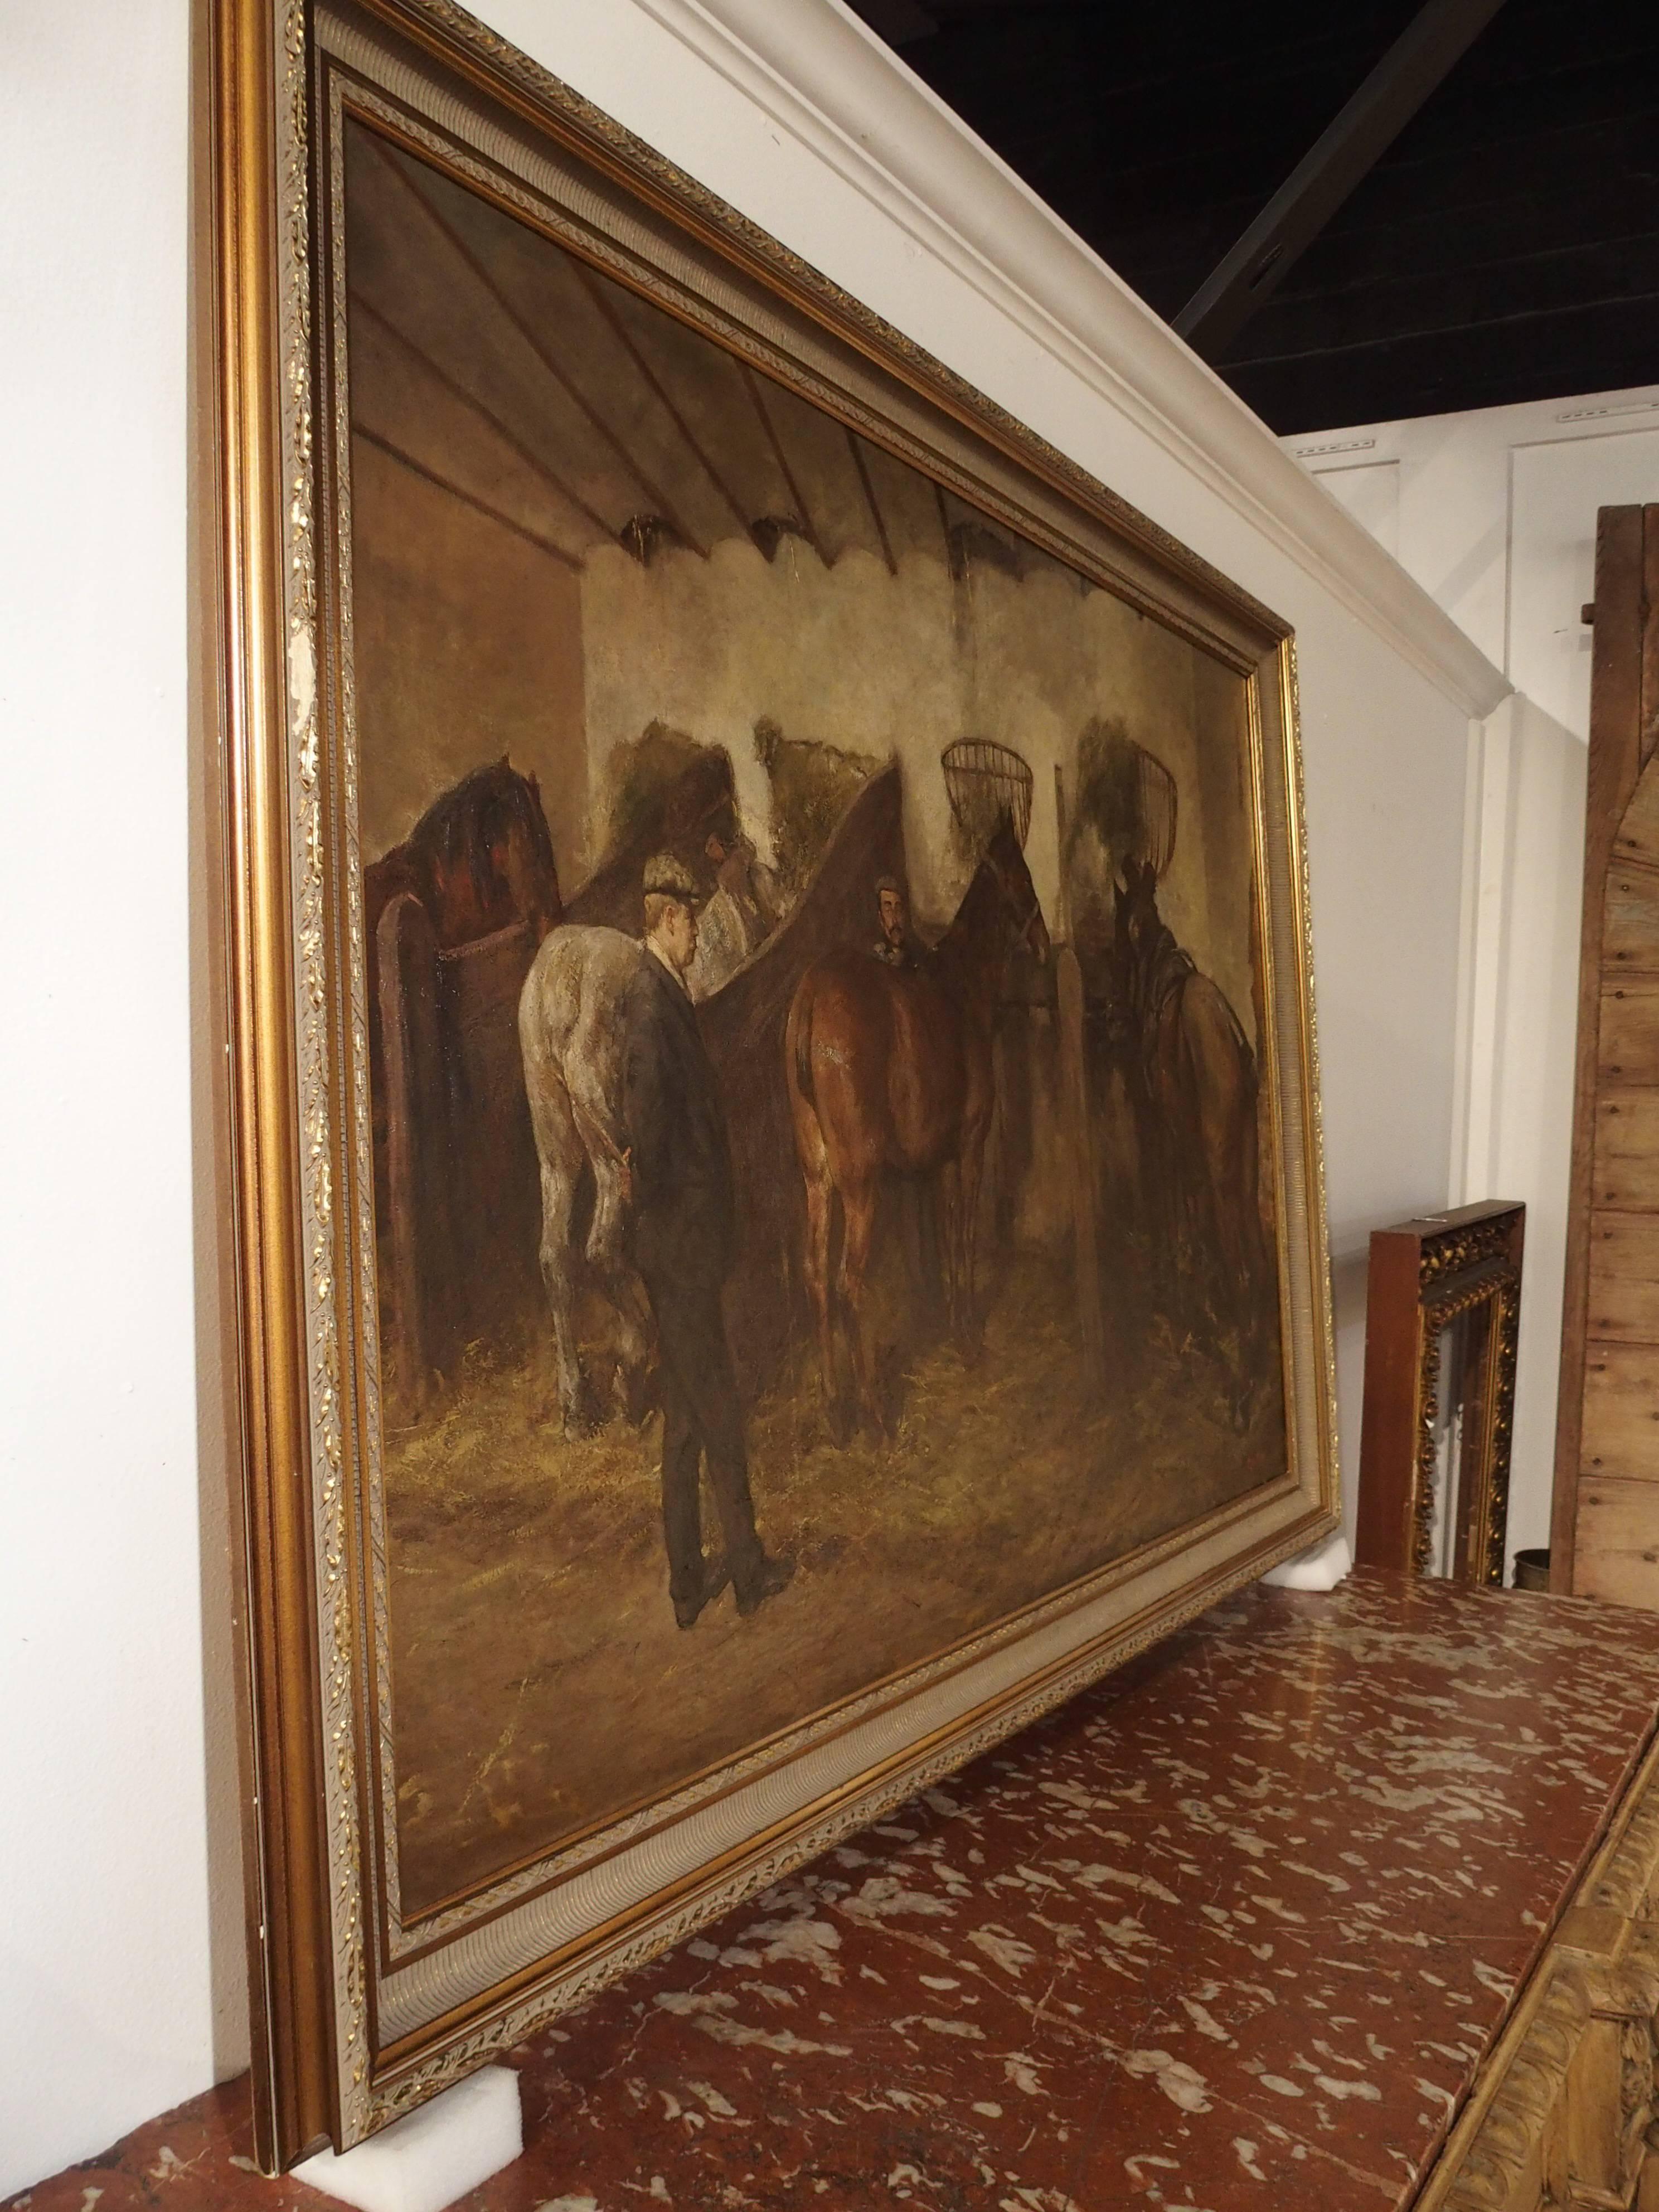 20th Century Large Oil on Canvas from Belgium, 'The Horse Stable'